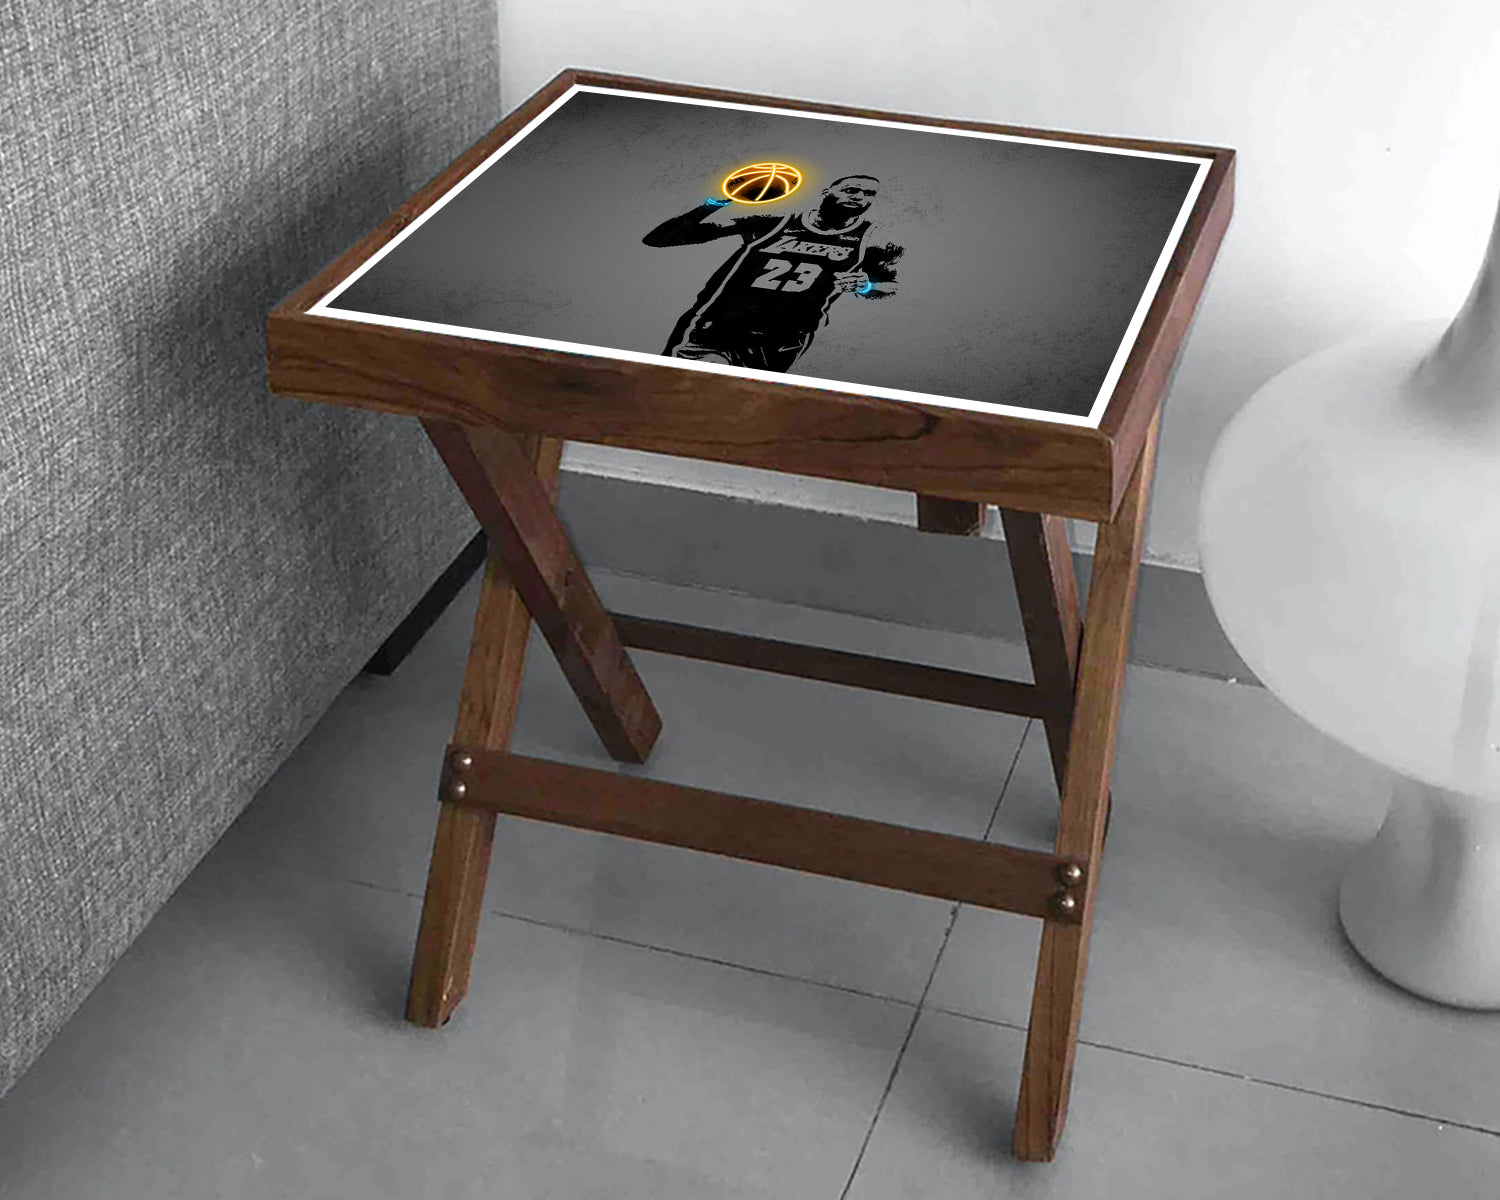 LeBron James Neon Effect Coffee and Laptop Table 